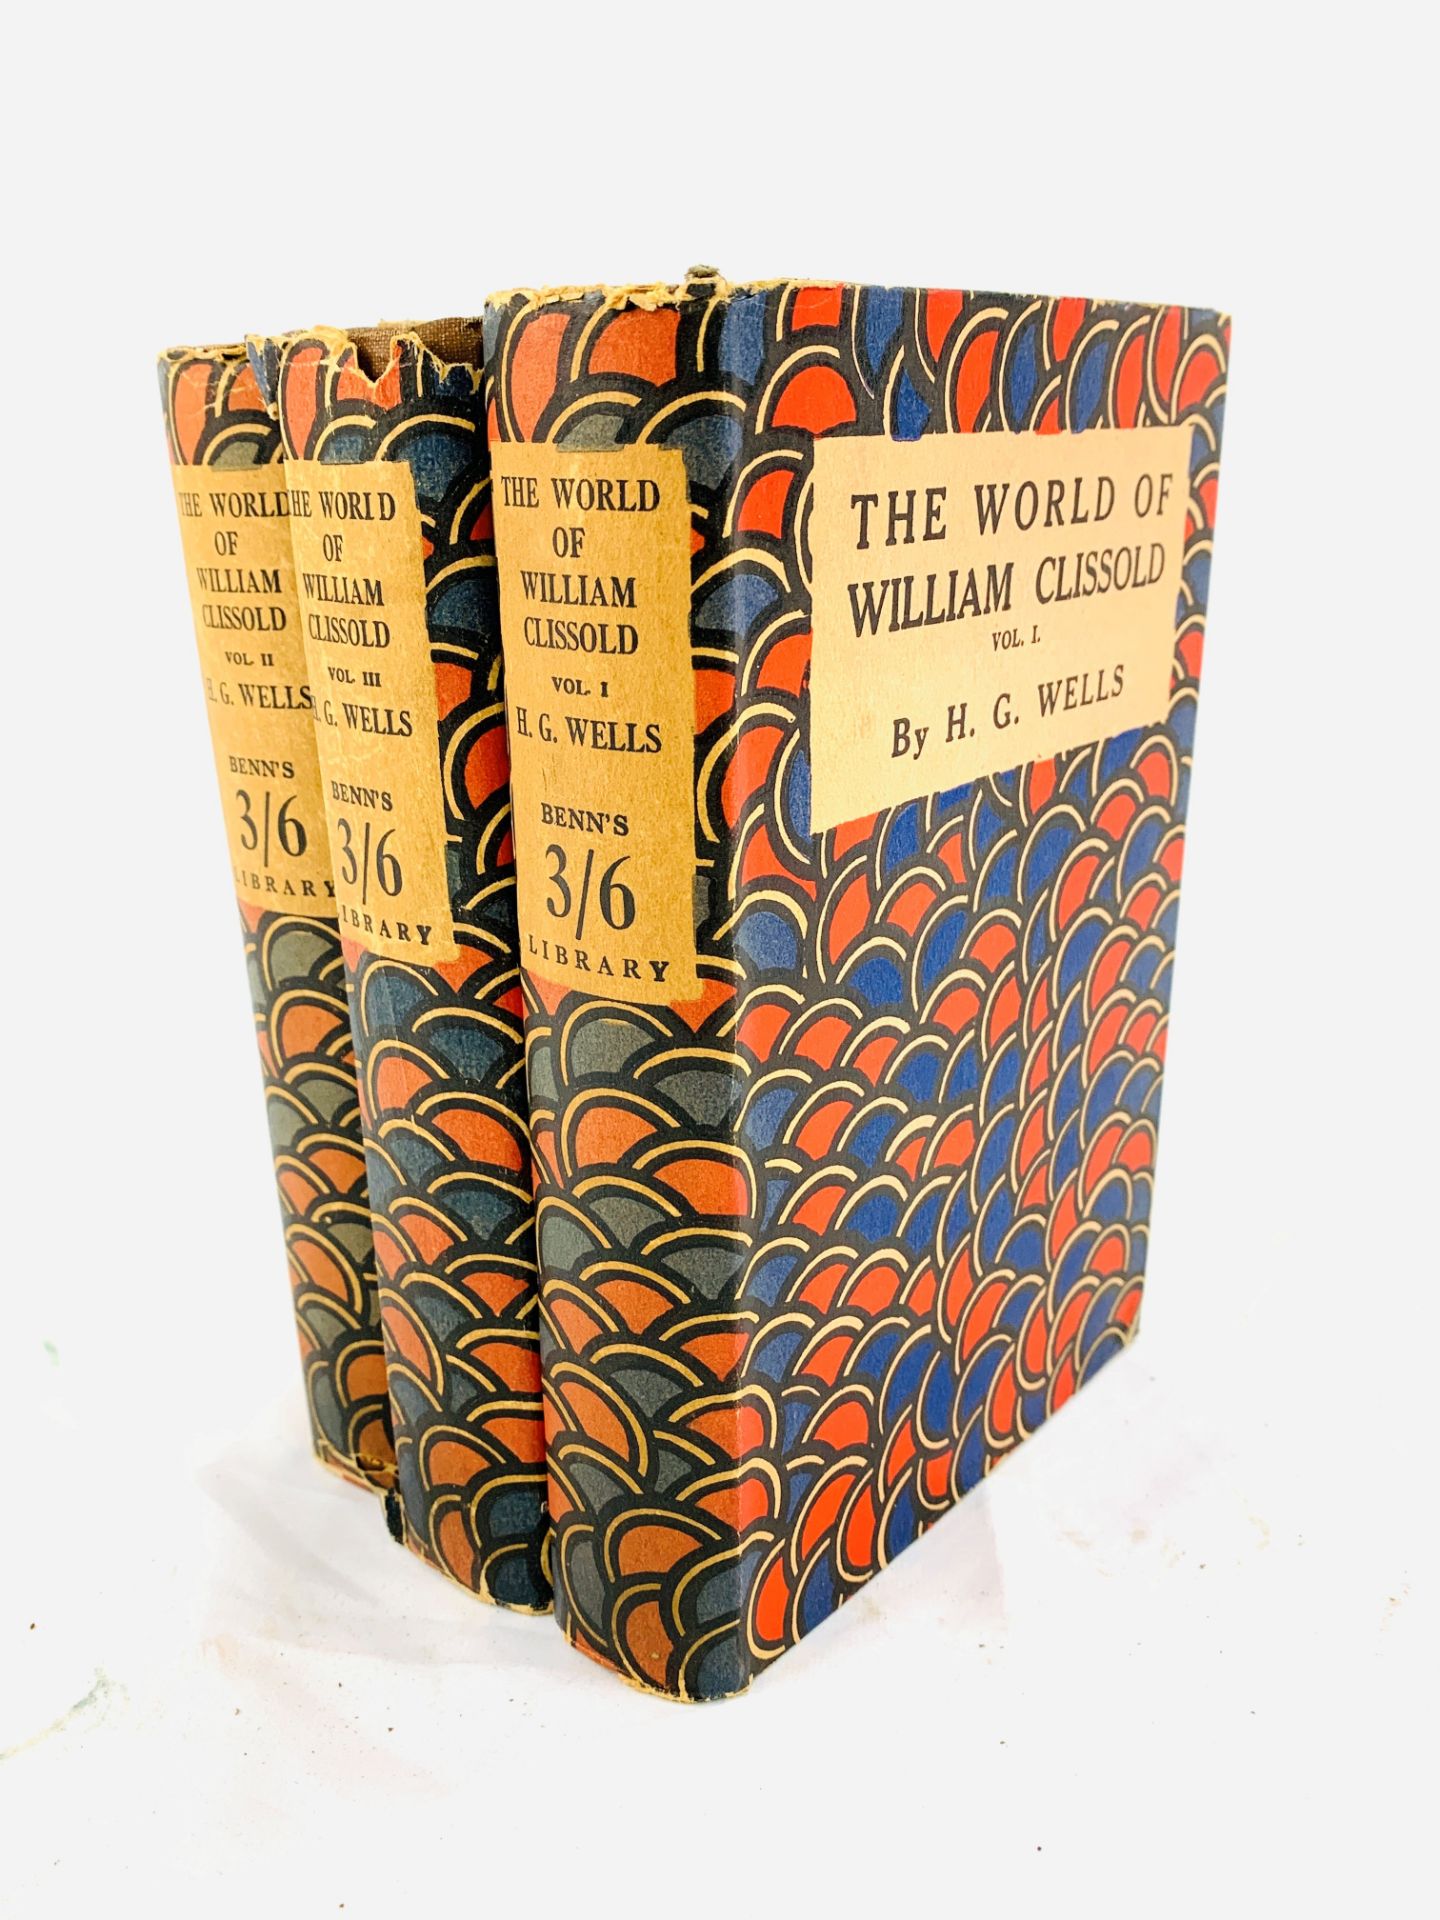 HG Wells: The World of William Clissold, 1926